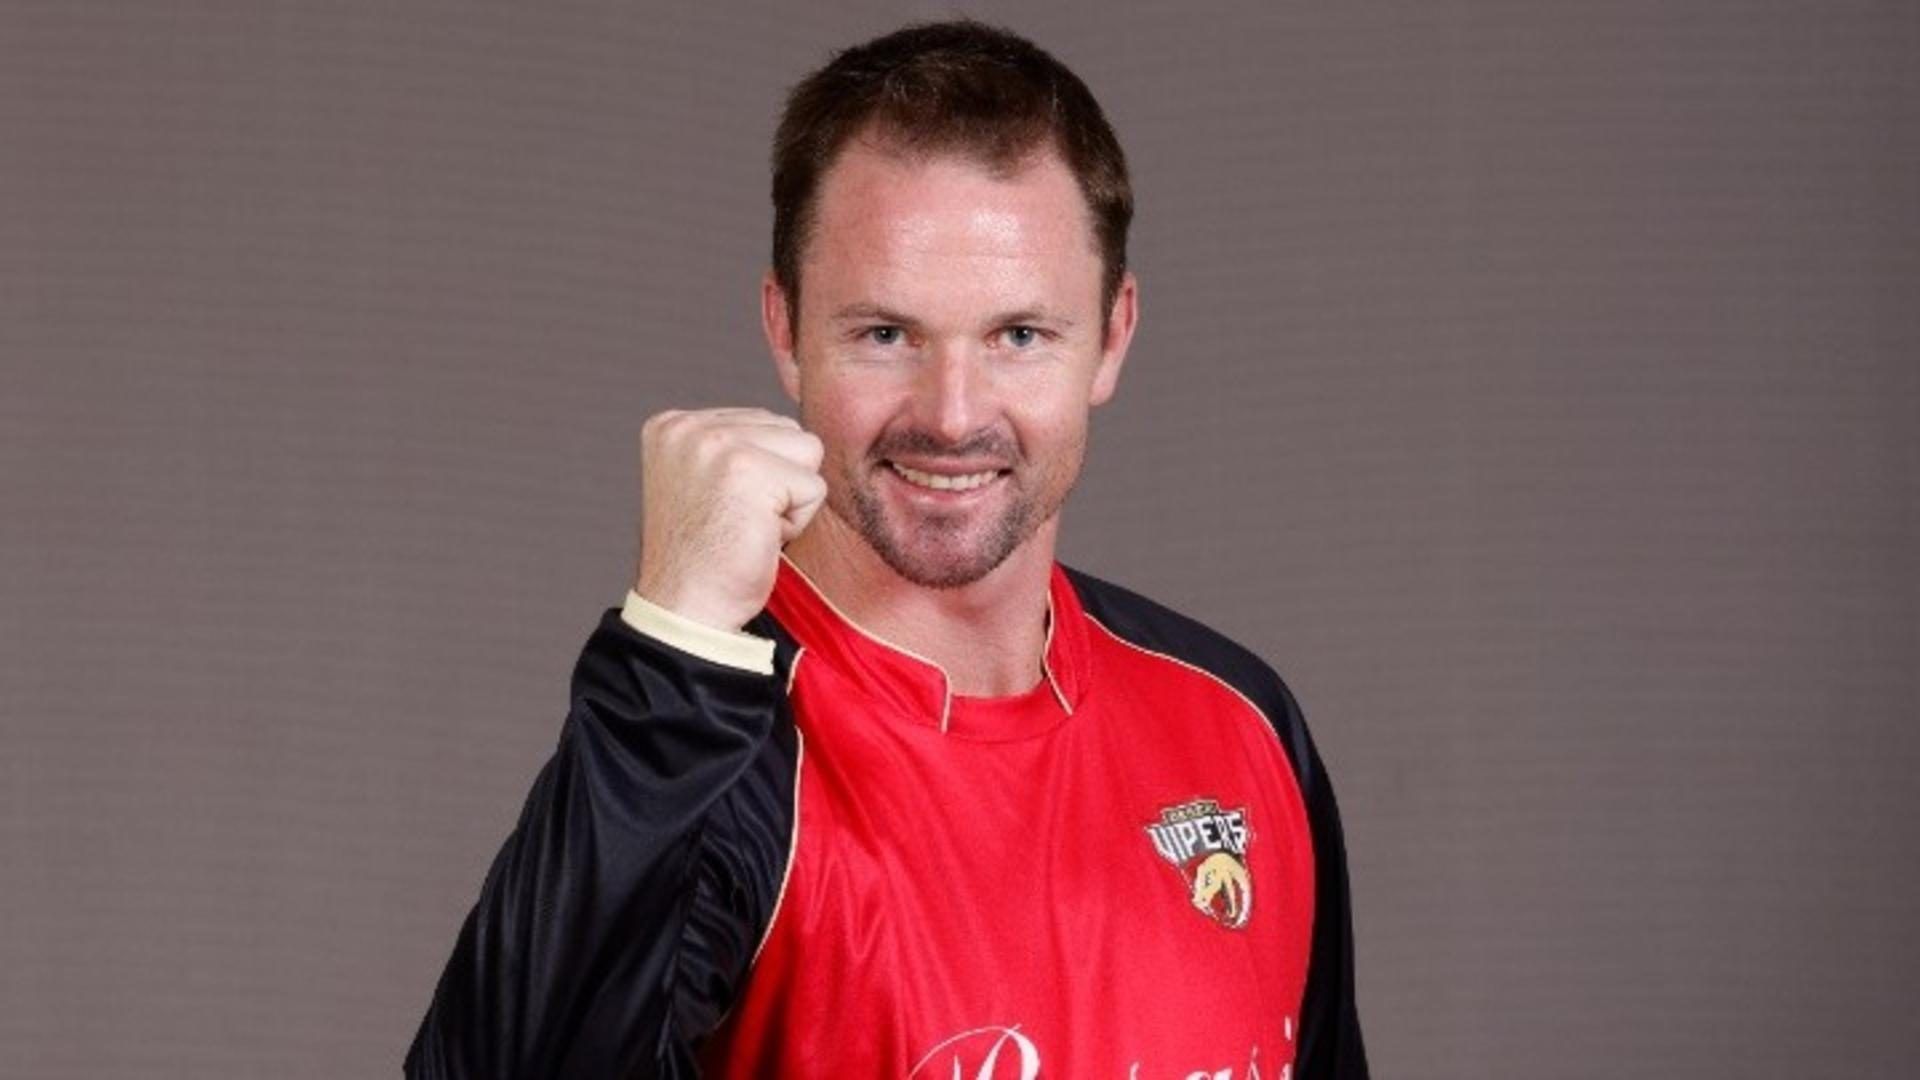 Colin Munro of Desert Vipers (Credits: Desert Vipers)